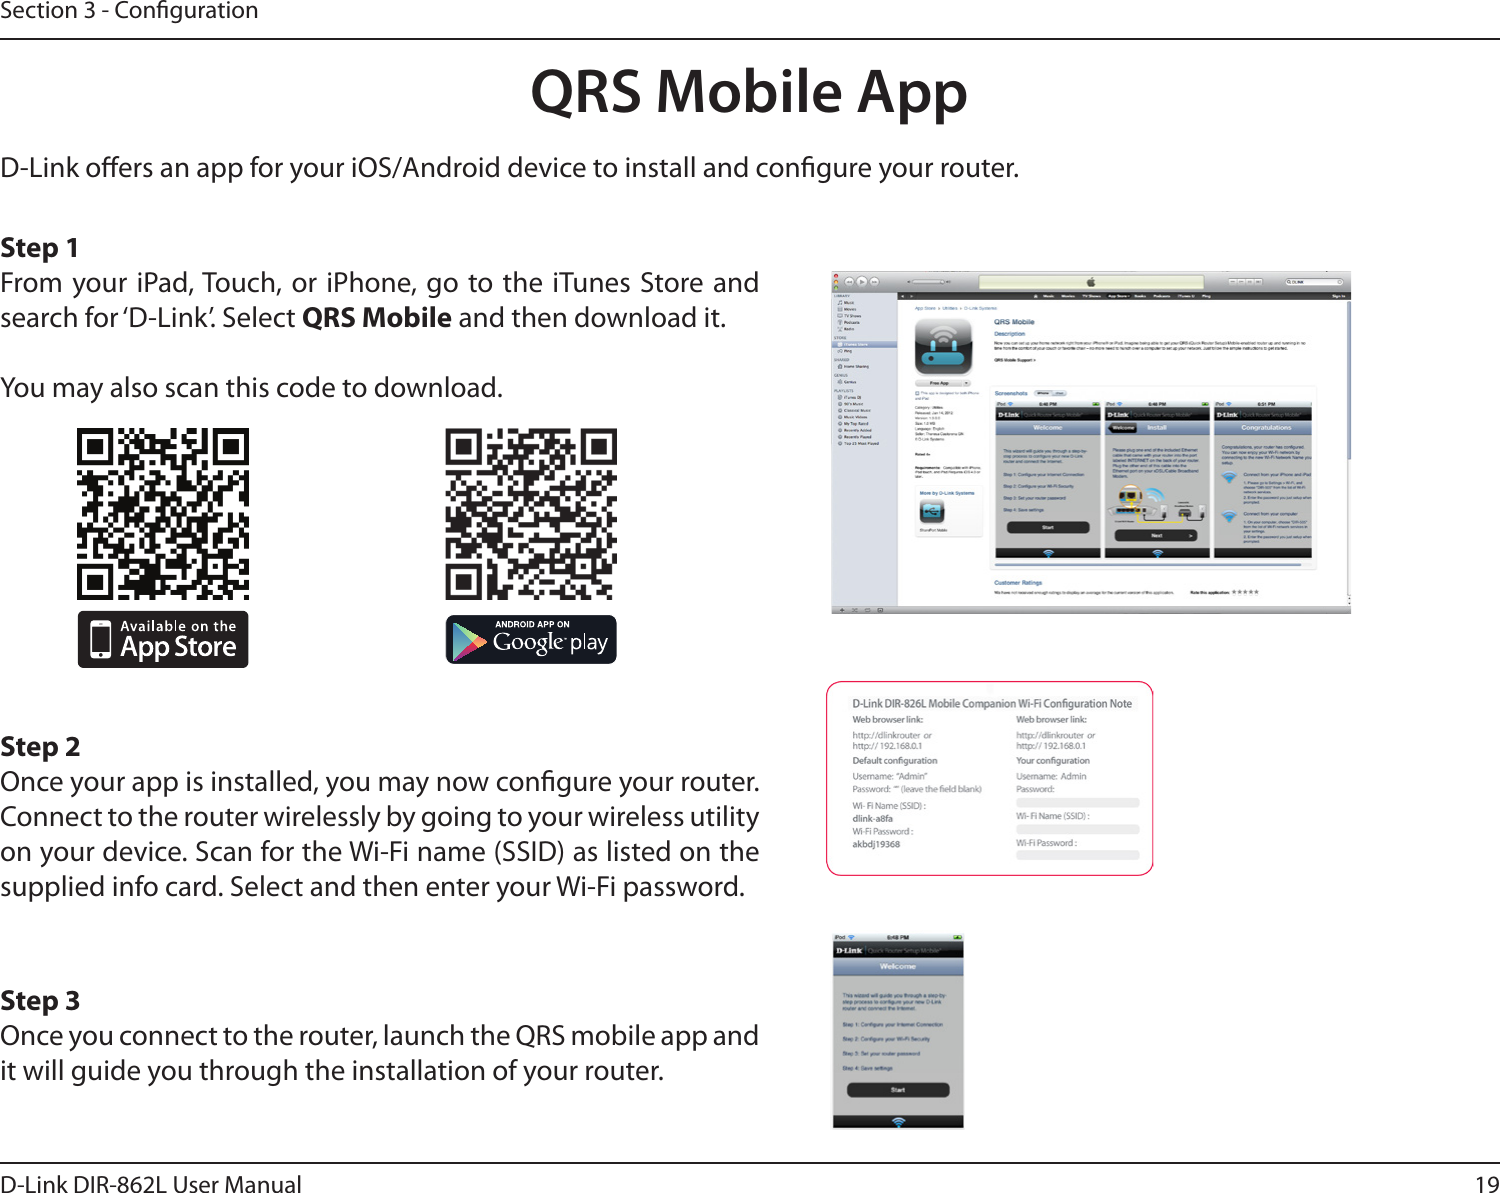 19D-Link DIR-862L User ManualSection 3 - CongurationQRS Mobile AppD-Link oers an app for your iOS/Android device to install and congure your router. Step 1From your iPad, Touch, or iPhone, go to the iTunes Store and search for ‘D-Link’. Select QRS Mobile and then download it.You may also scan this code to download.Step 2Once your app is installed, you may now congure your router. Connect to the router wirelessly by going to your wireless utility on your device. Scan for the Wi-Fi name (SSID) as listed on the supplied info card. Select and then enter your Wi-Fi password.Step 3Once you connect to the router, launch the QRS mobile app and it will guide you through the installation of your router.